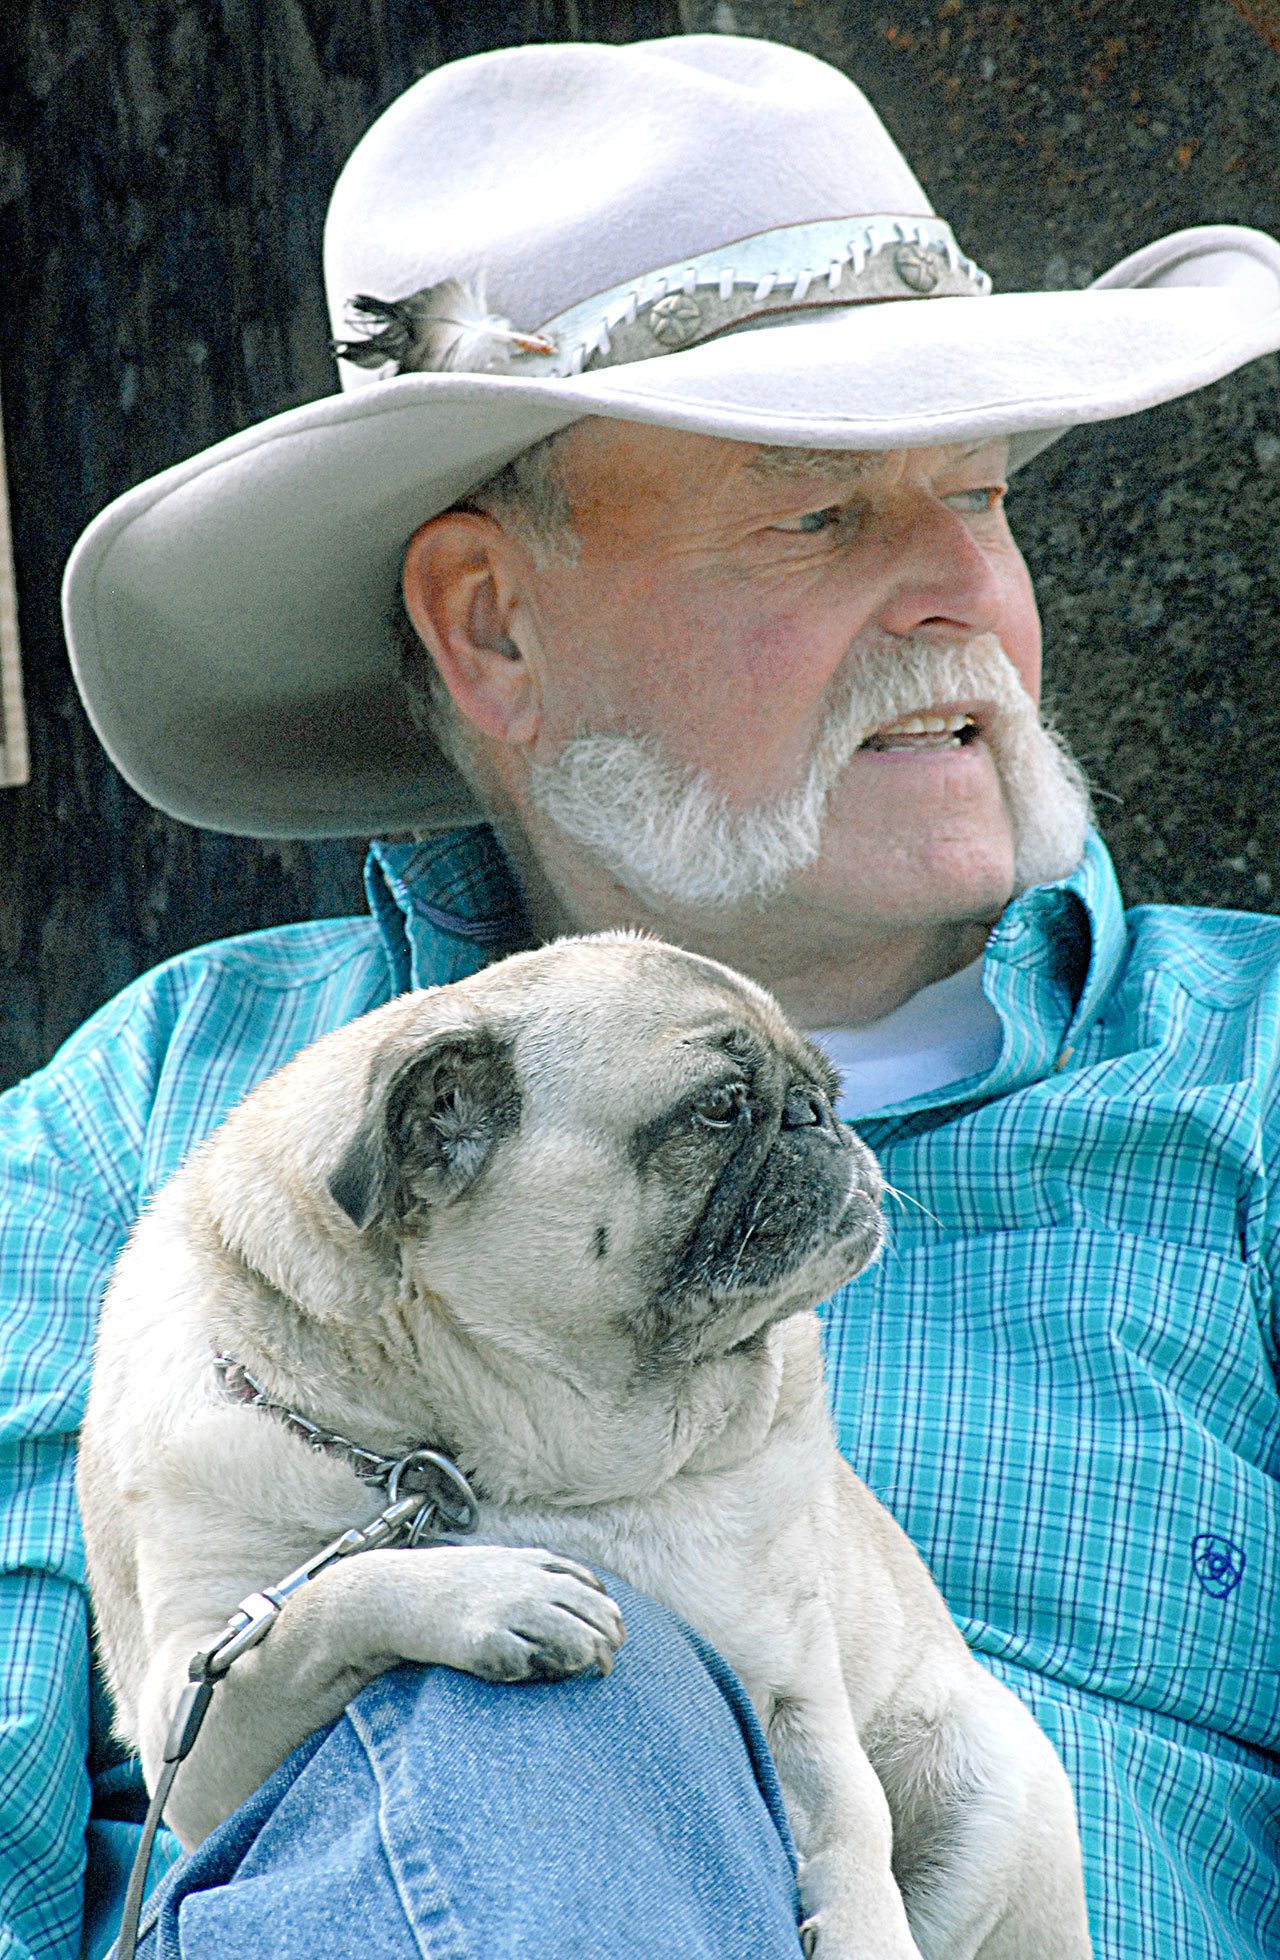 Tom Burns of Port Angeles watches the Joyce Daze crowds with his dog, Honey, a Chinese pug. (Keith Thorpe/Peninsula Daily News)